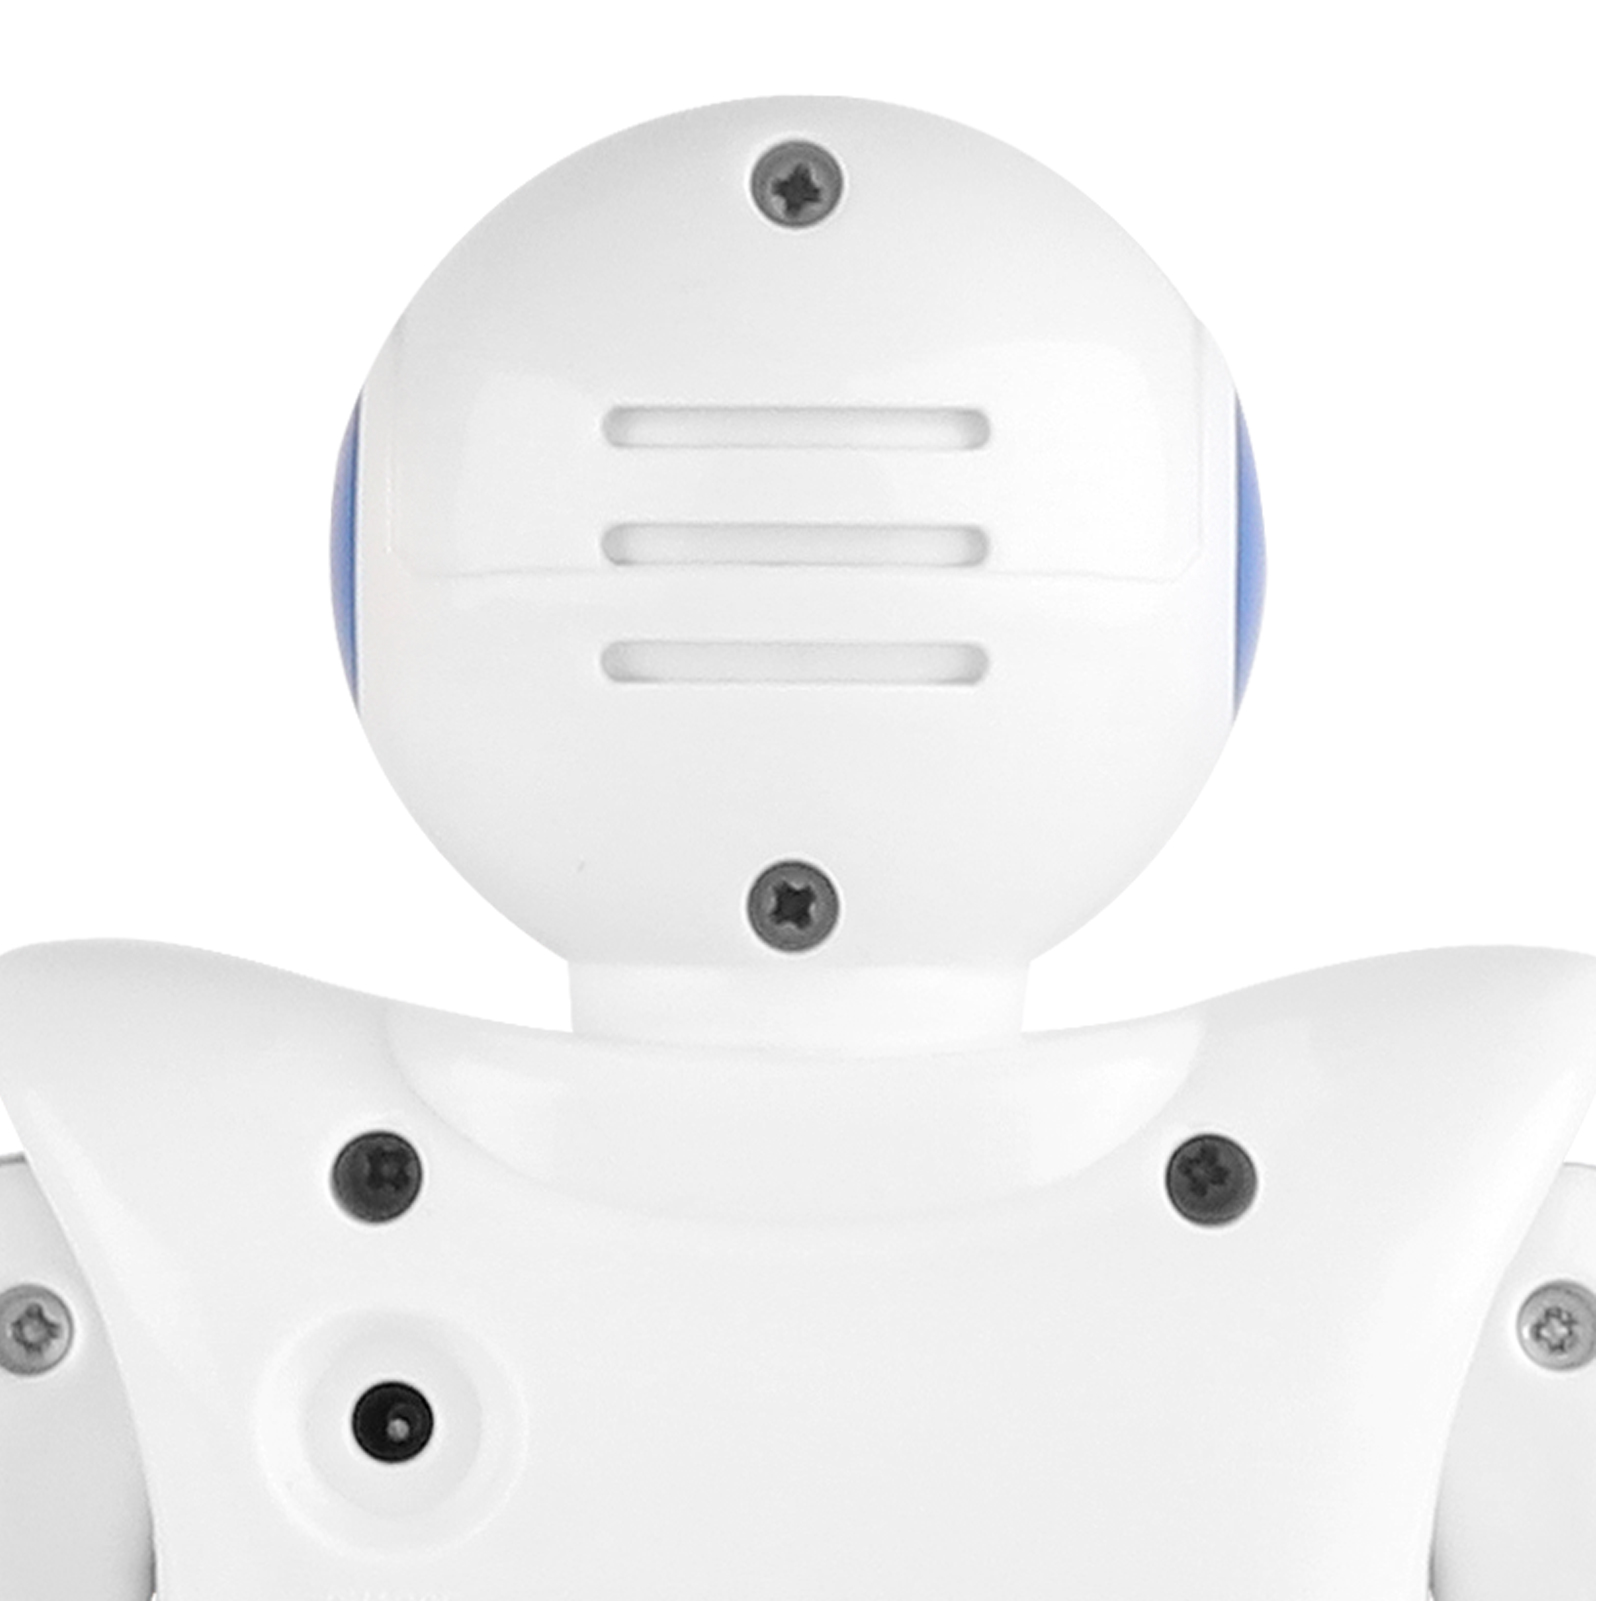 Dcenta Smart Intelligent Robot Toy (Blue and White) - image 4 of 7